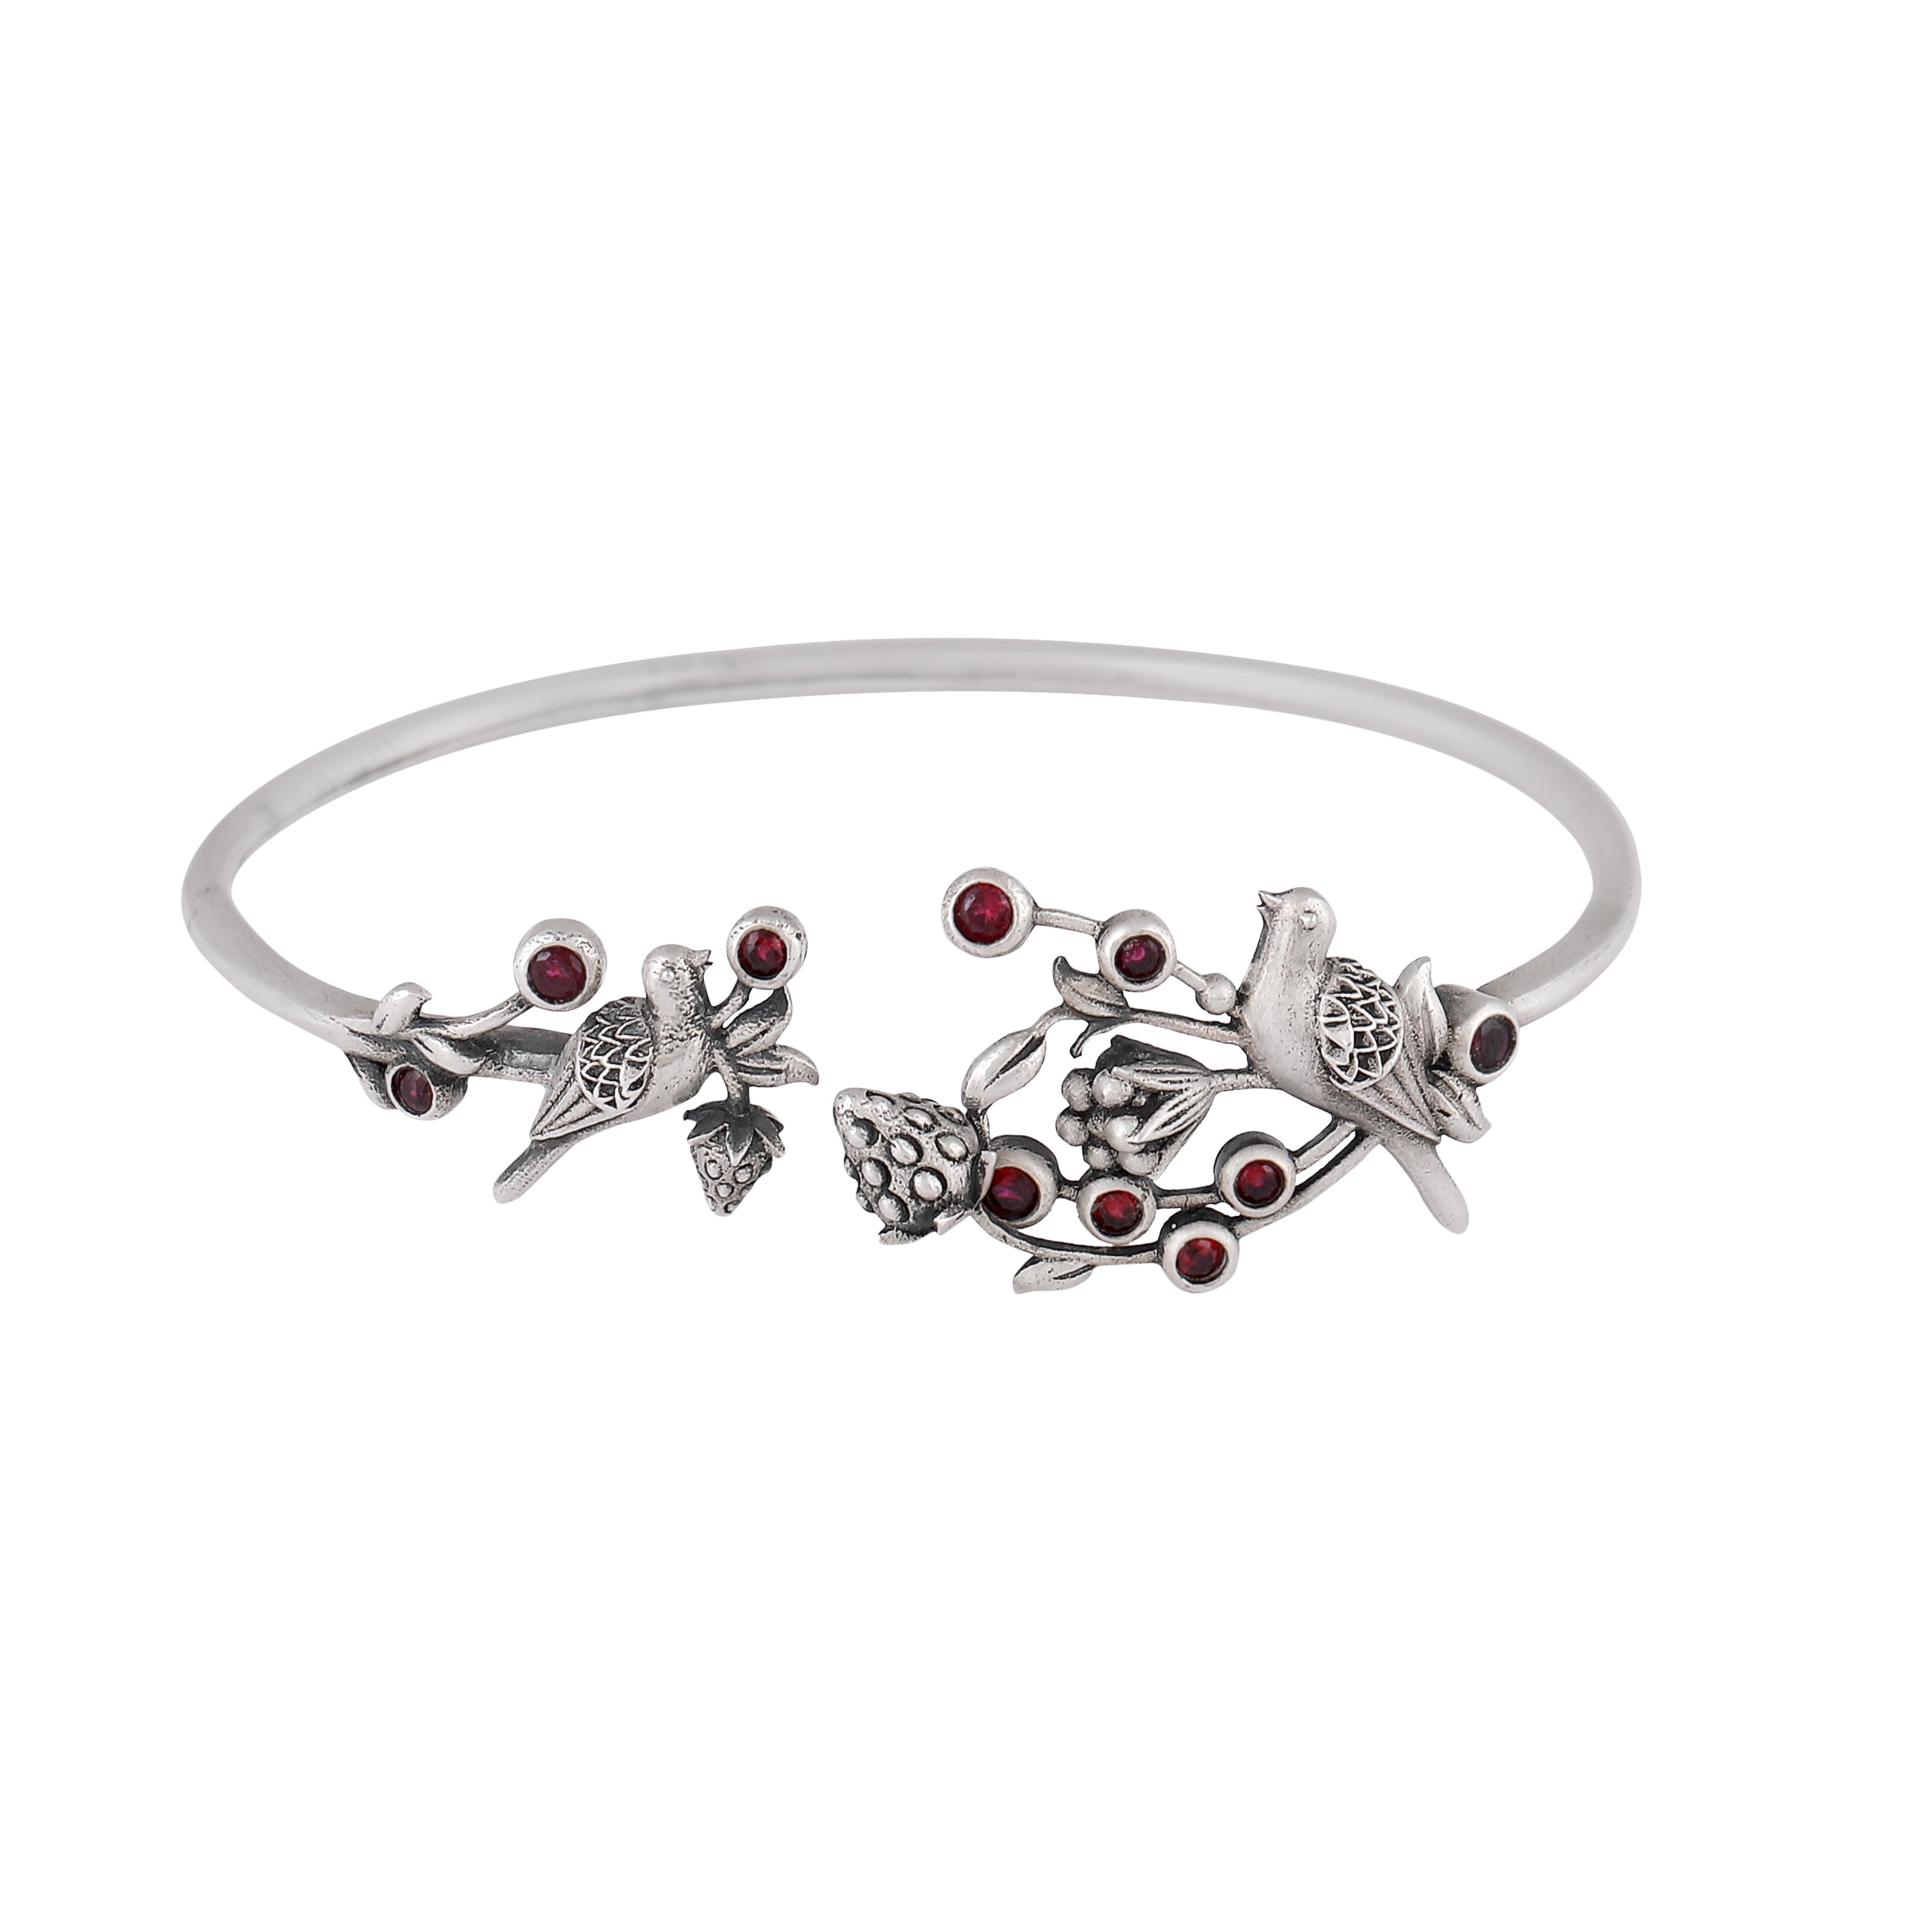 William Morris - Strawberry Thief Partner Silver Bangle by Moha